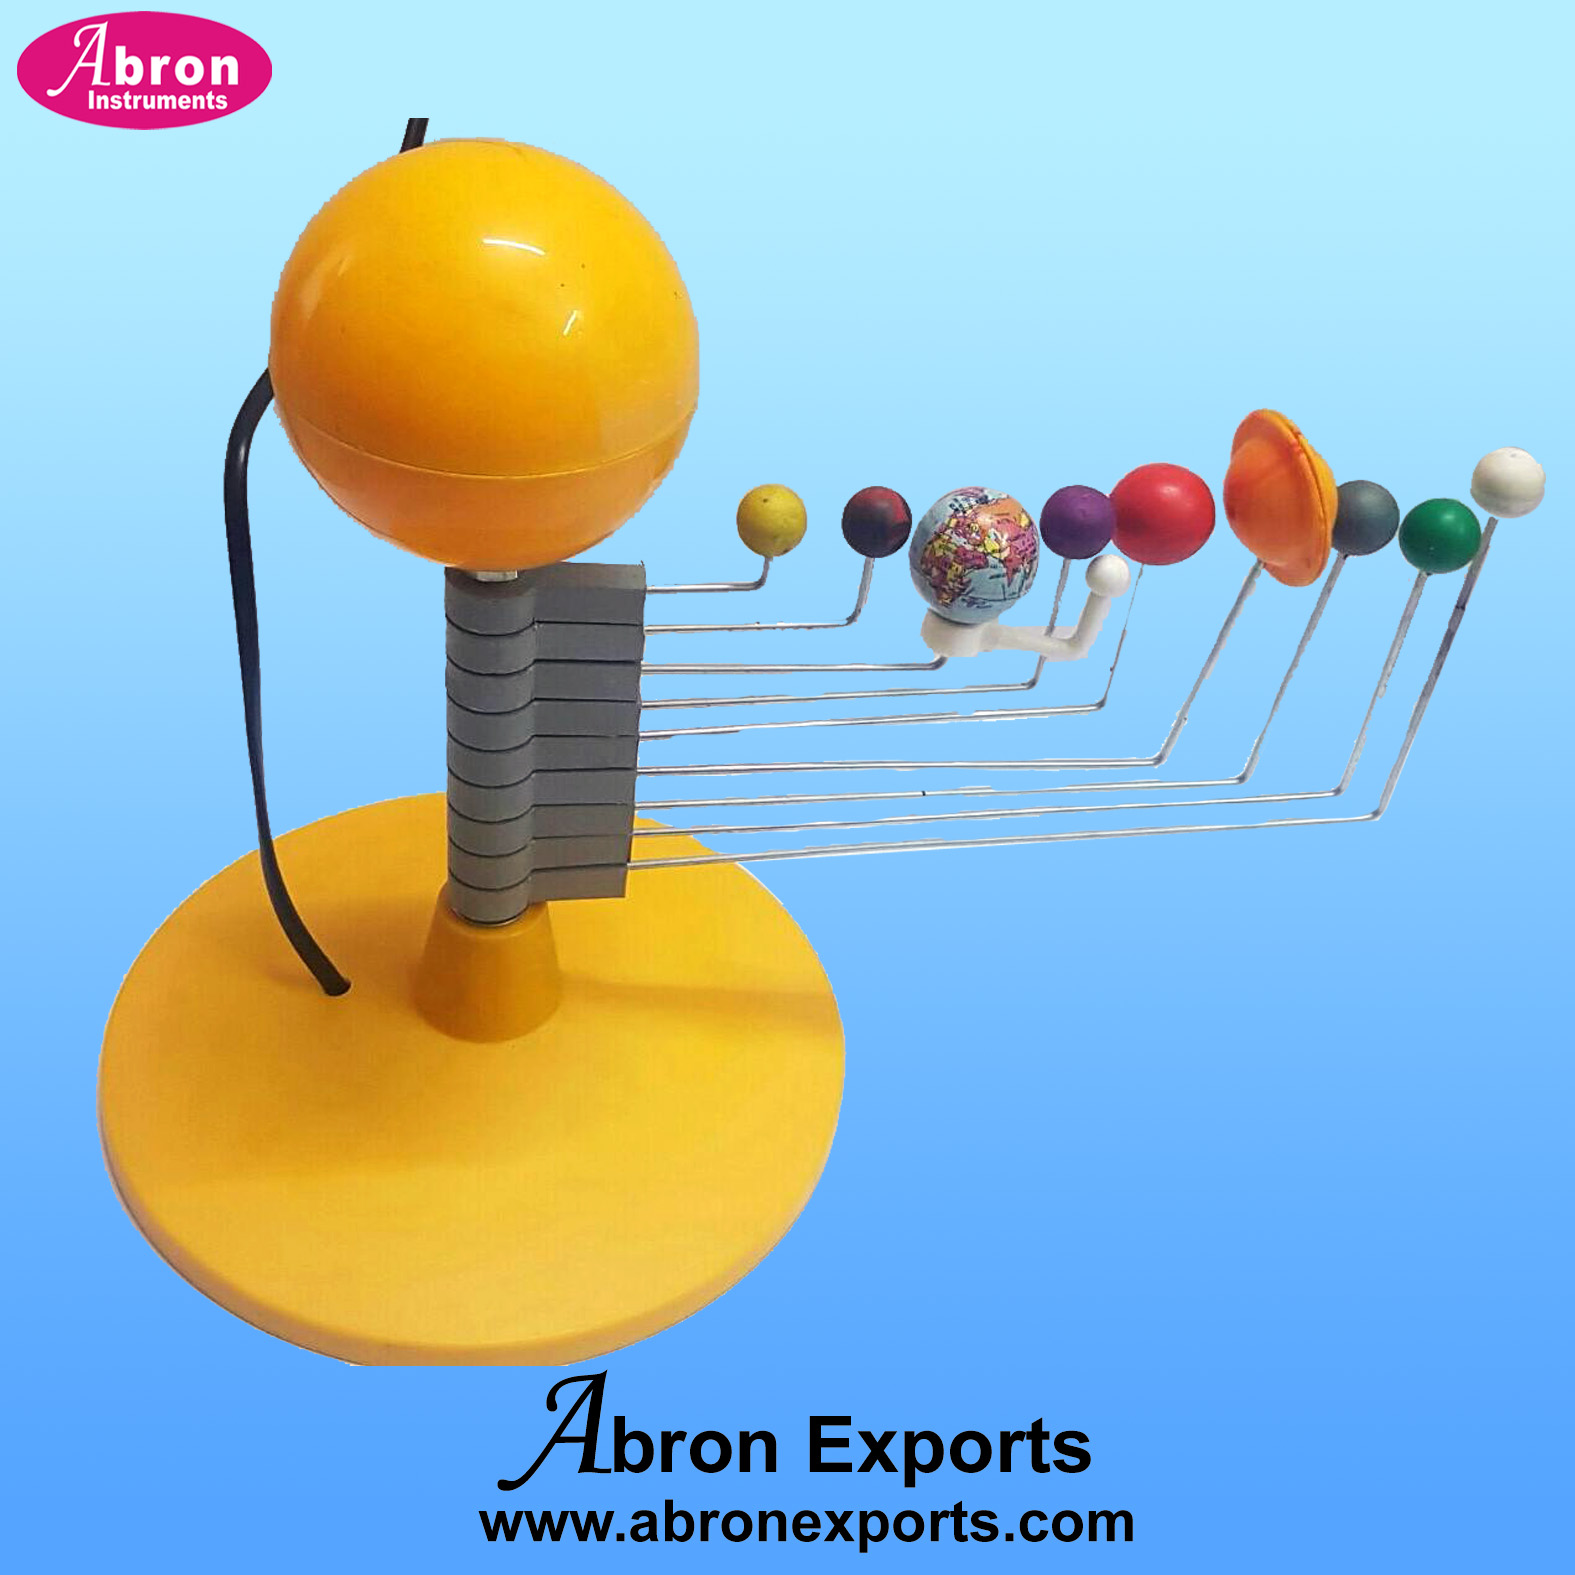 Model solar system electric High quality  9 planets abron AGA-251D 